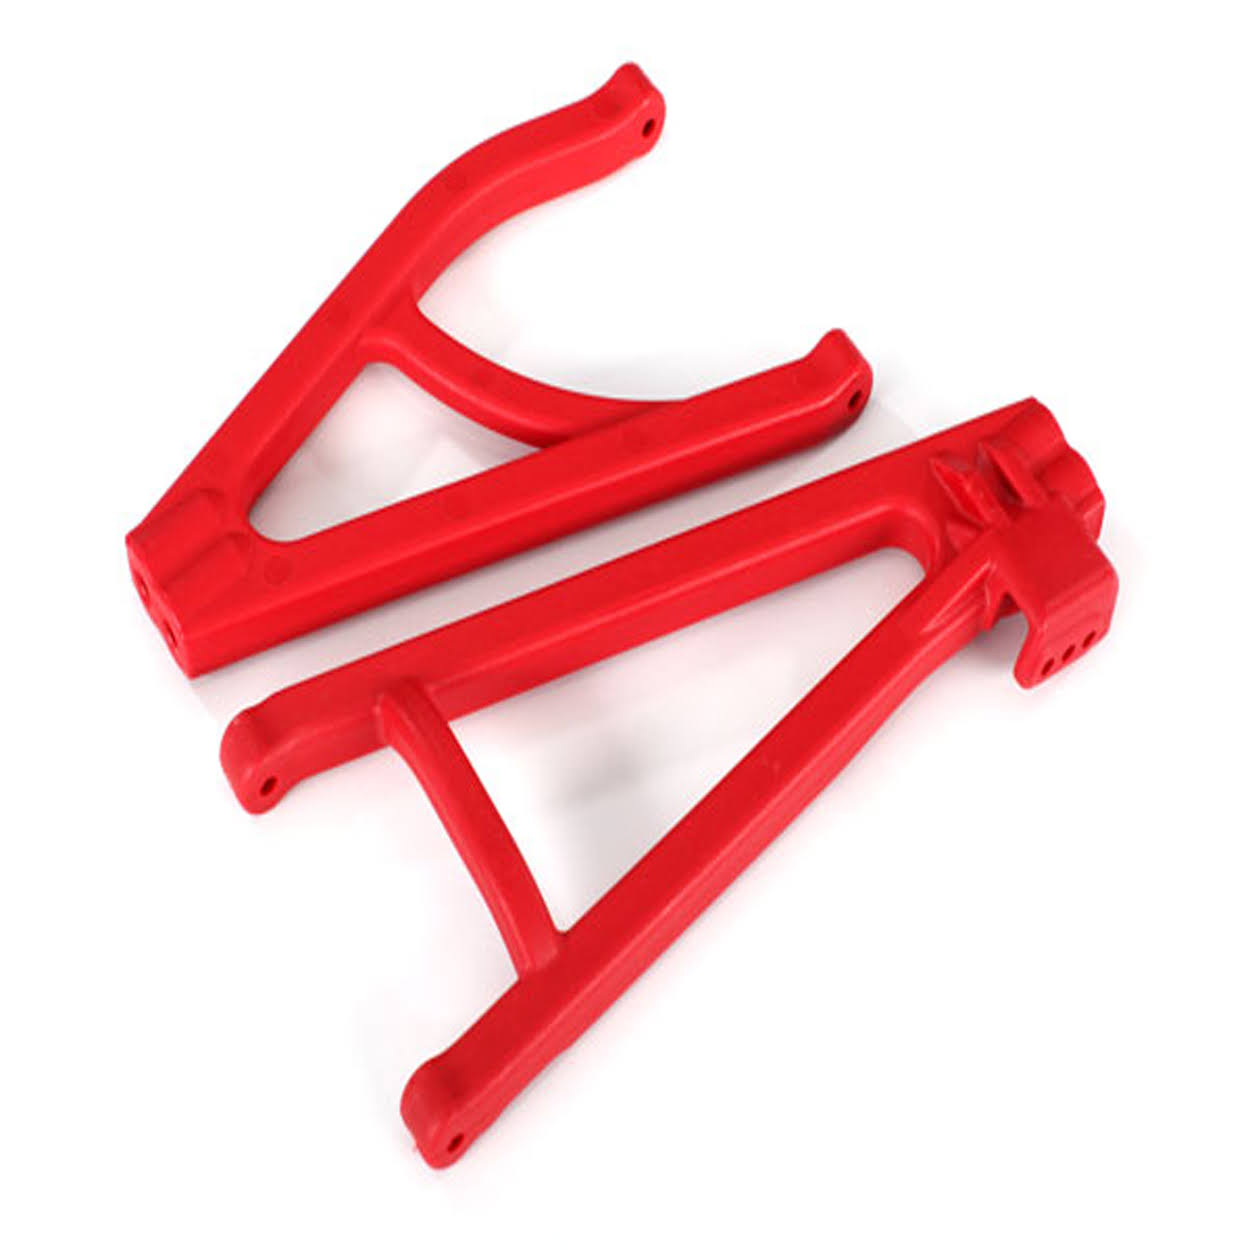 Traxxas 8634R - Suspension Arms, Rear Left - Red